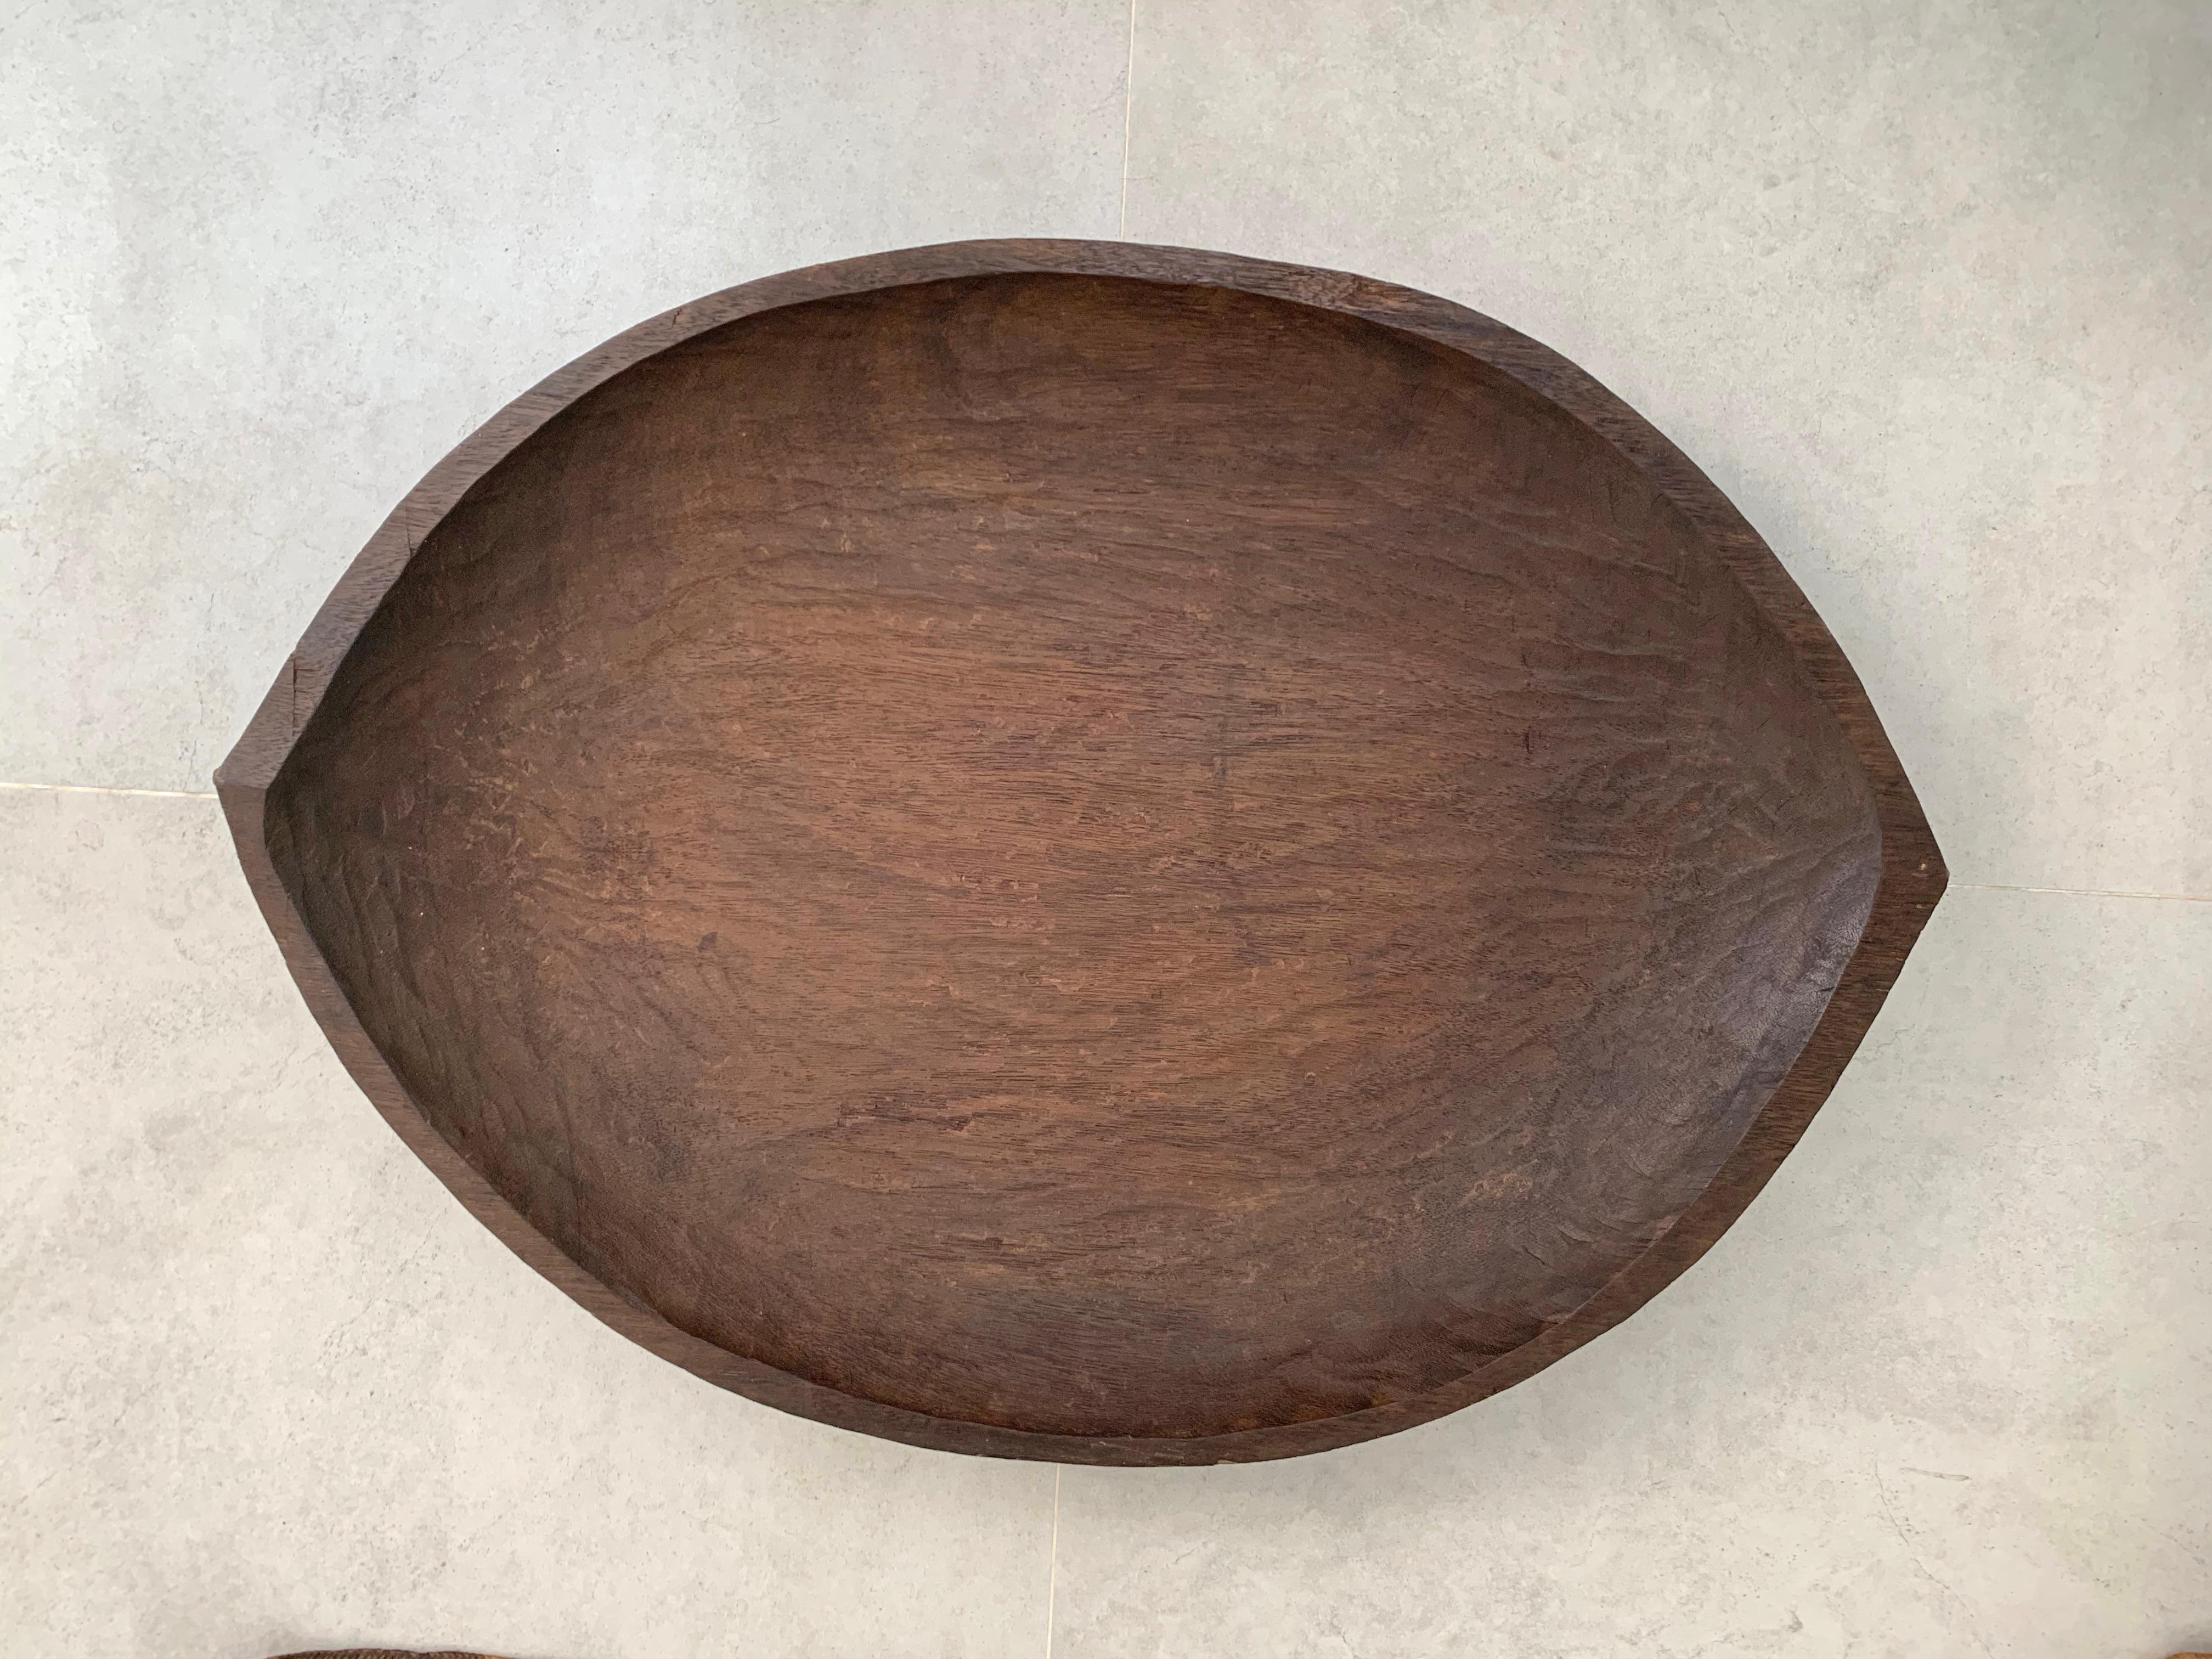 Hand-Carved Wooden Tray / Bowl Mentawai Tribe of Indonesia, Mid-20th Century  For Sale 3